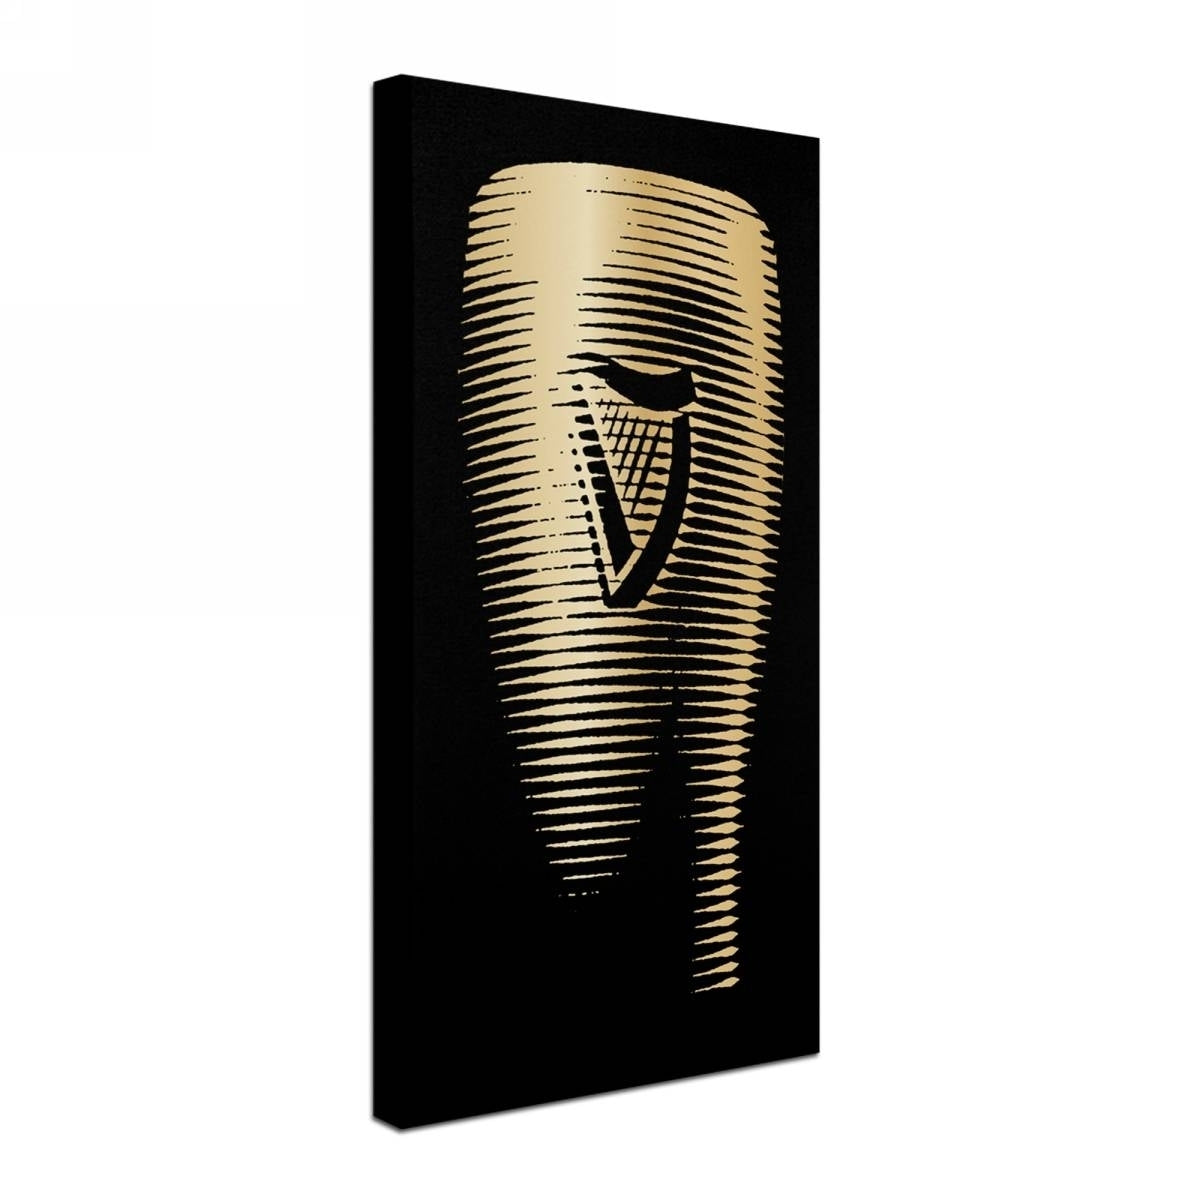 A Guinness Brewery 'Guinness VII' glass on a black canvas, creating timeless charm in wall Guinness canvas art.